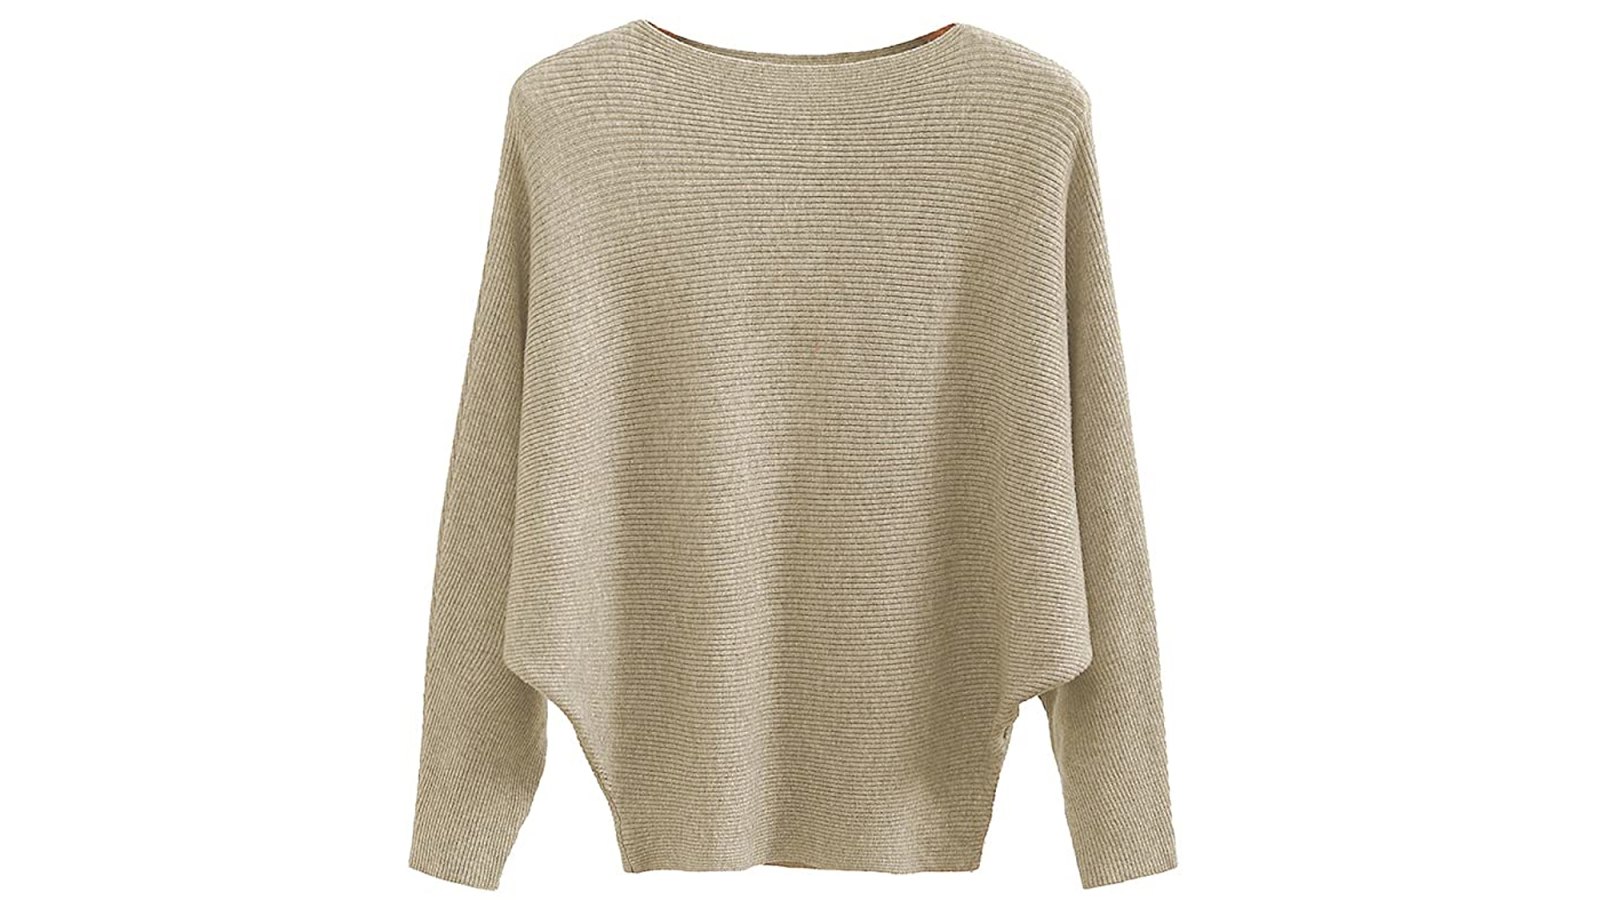 GABERLY Essential Cozy Sweater Comes in All of Our Favorite Colors